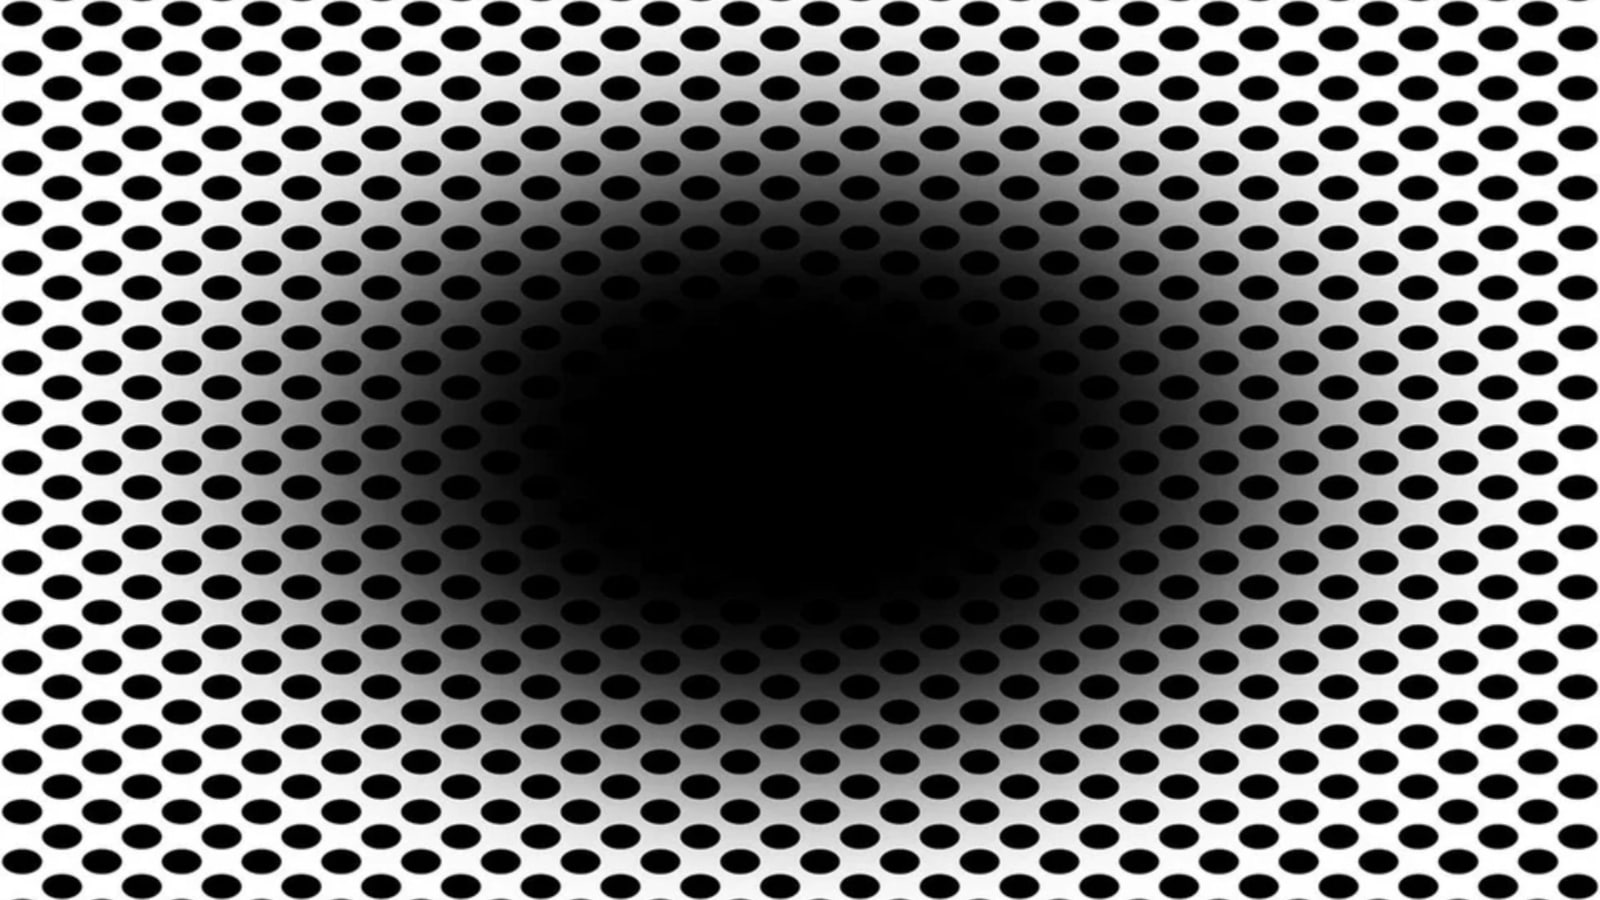 Optical Illusion: Is the black hole expanding, or is it staying ...